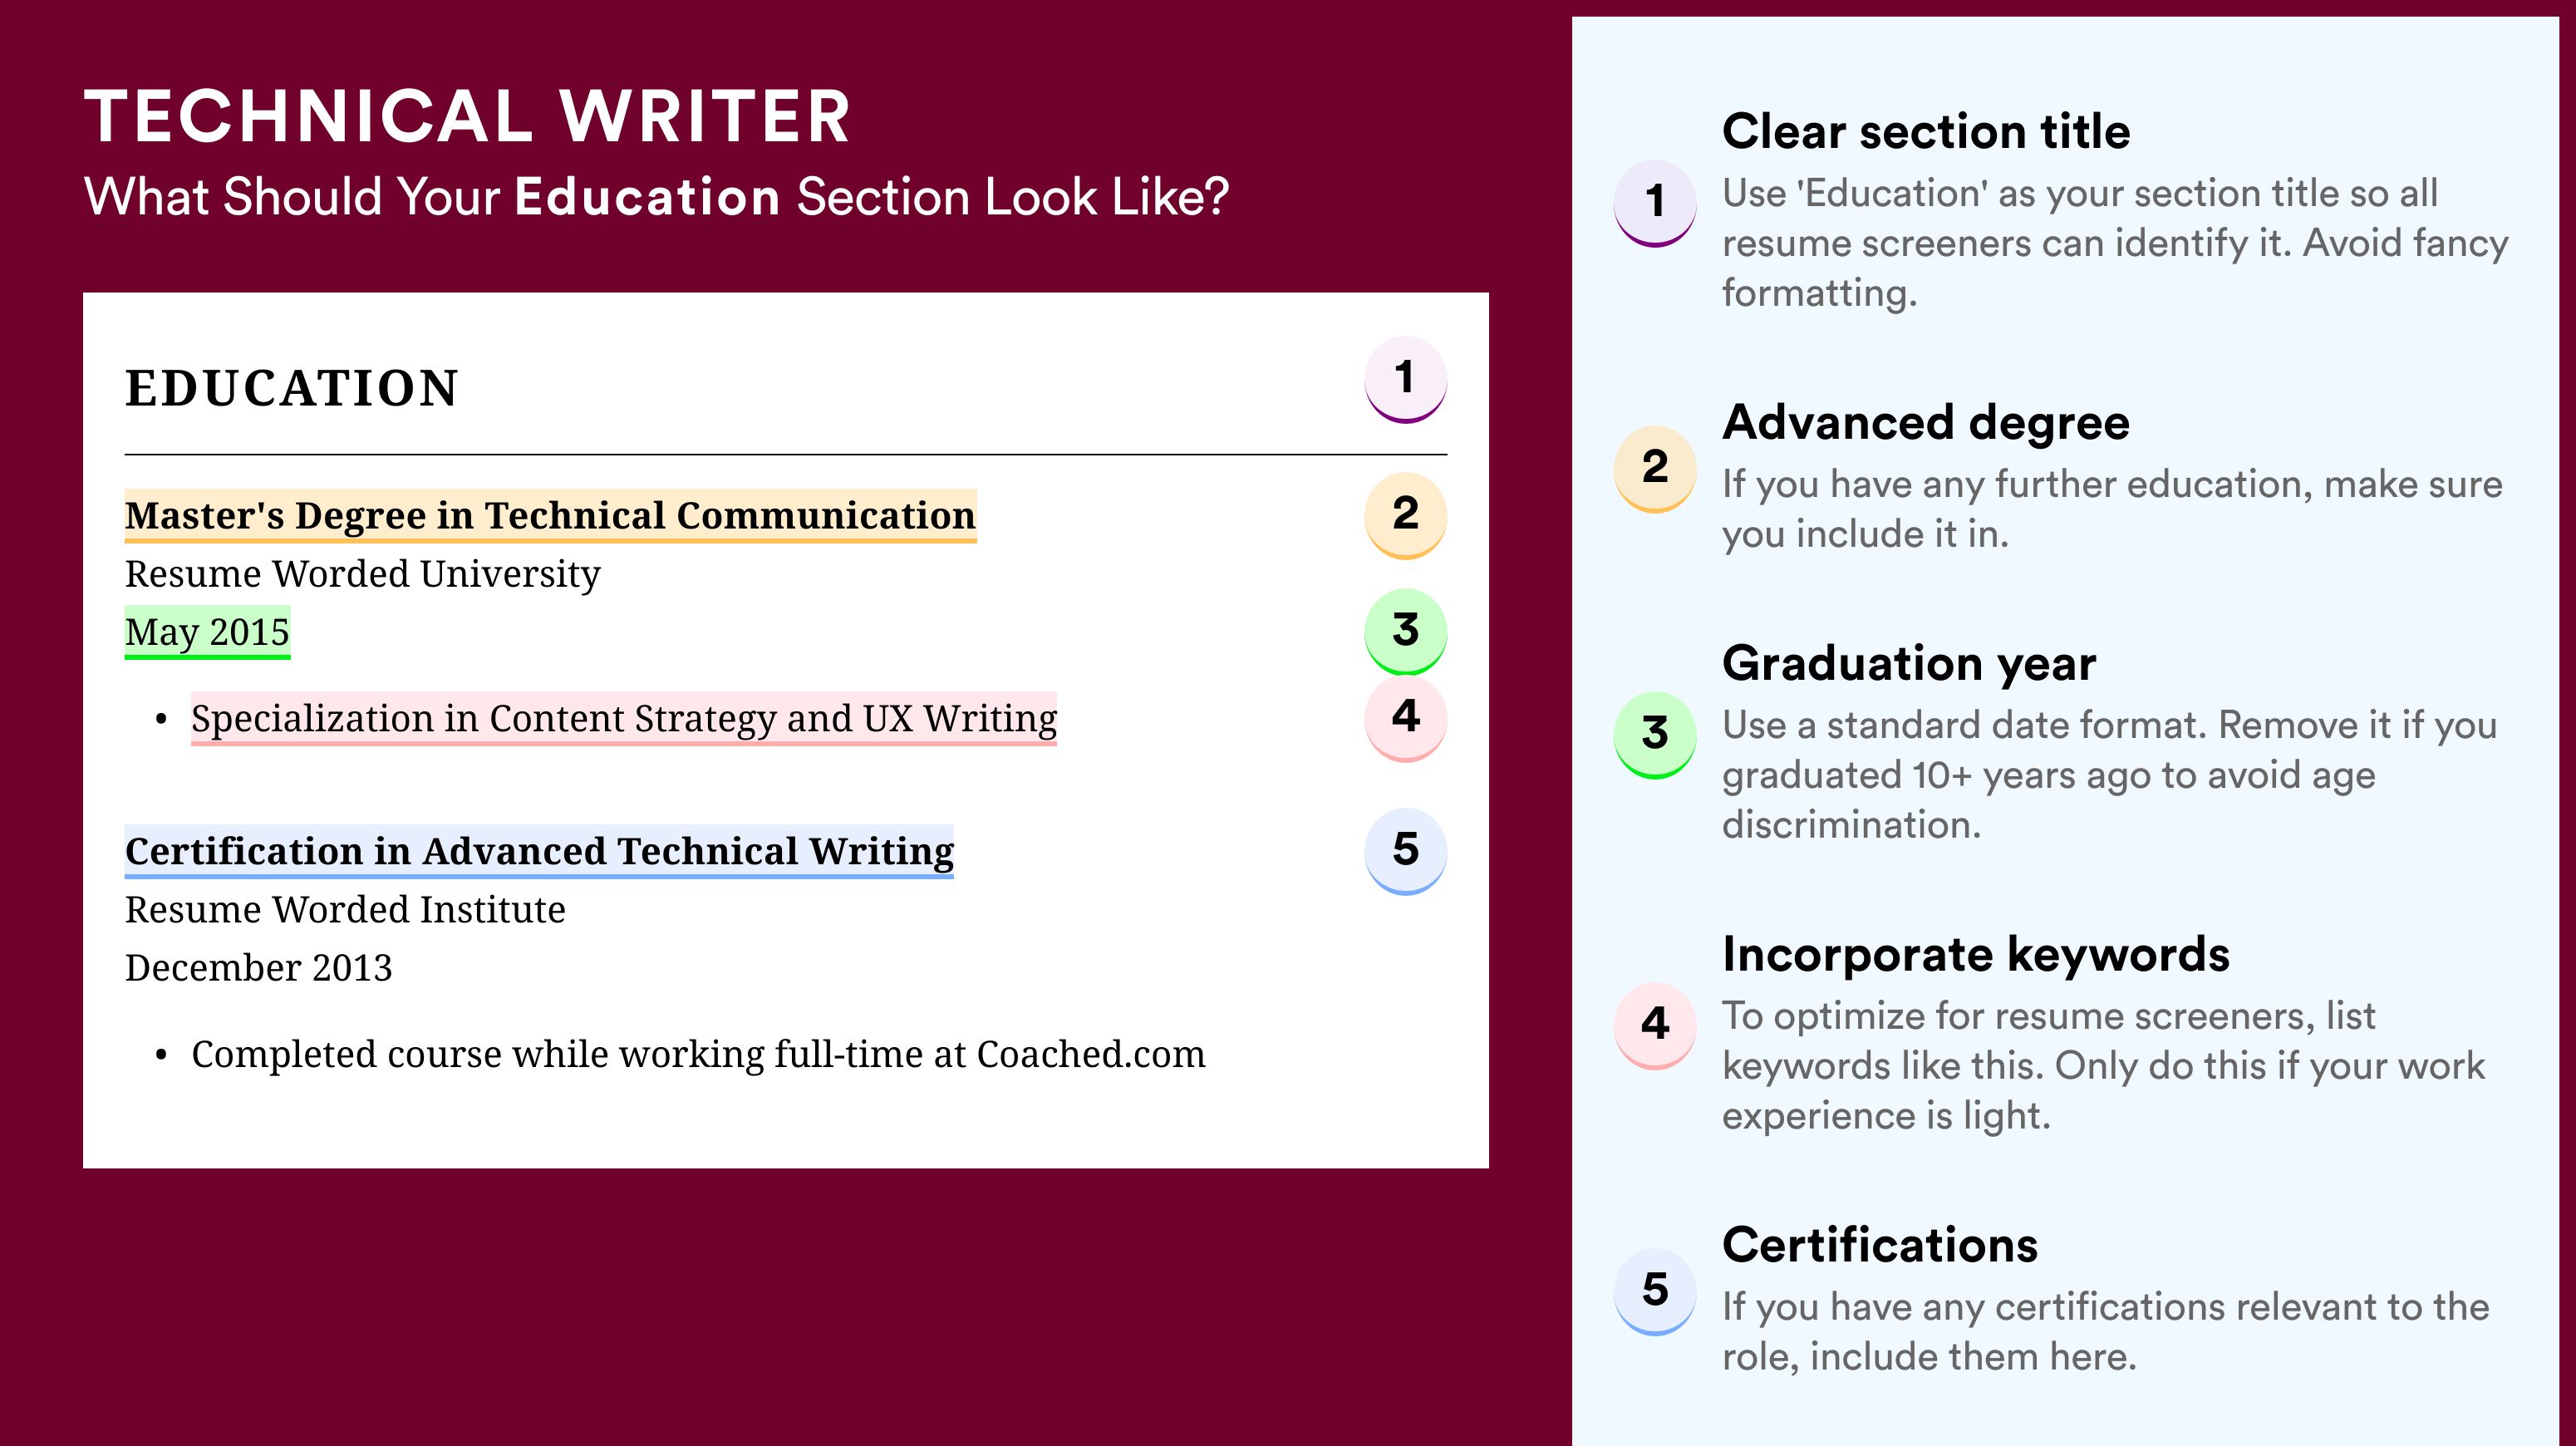 How To Write An Education Section - Technical Writer Roles